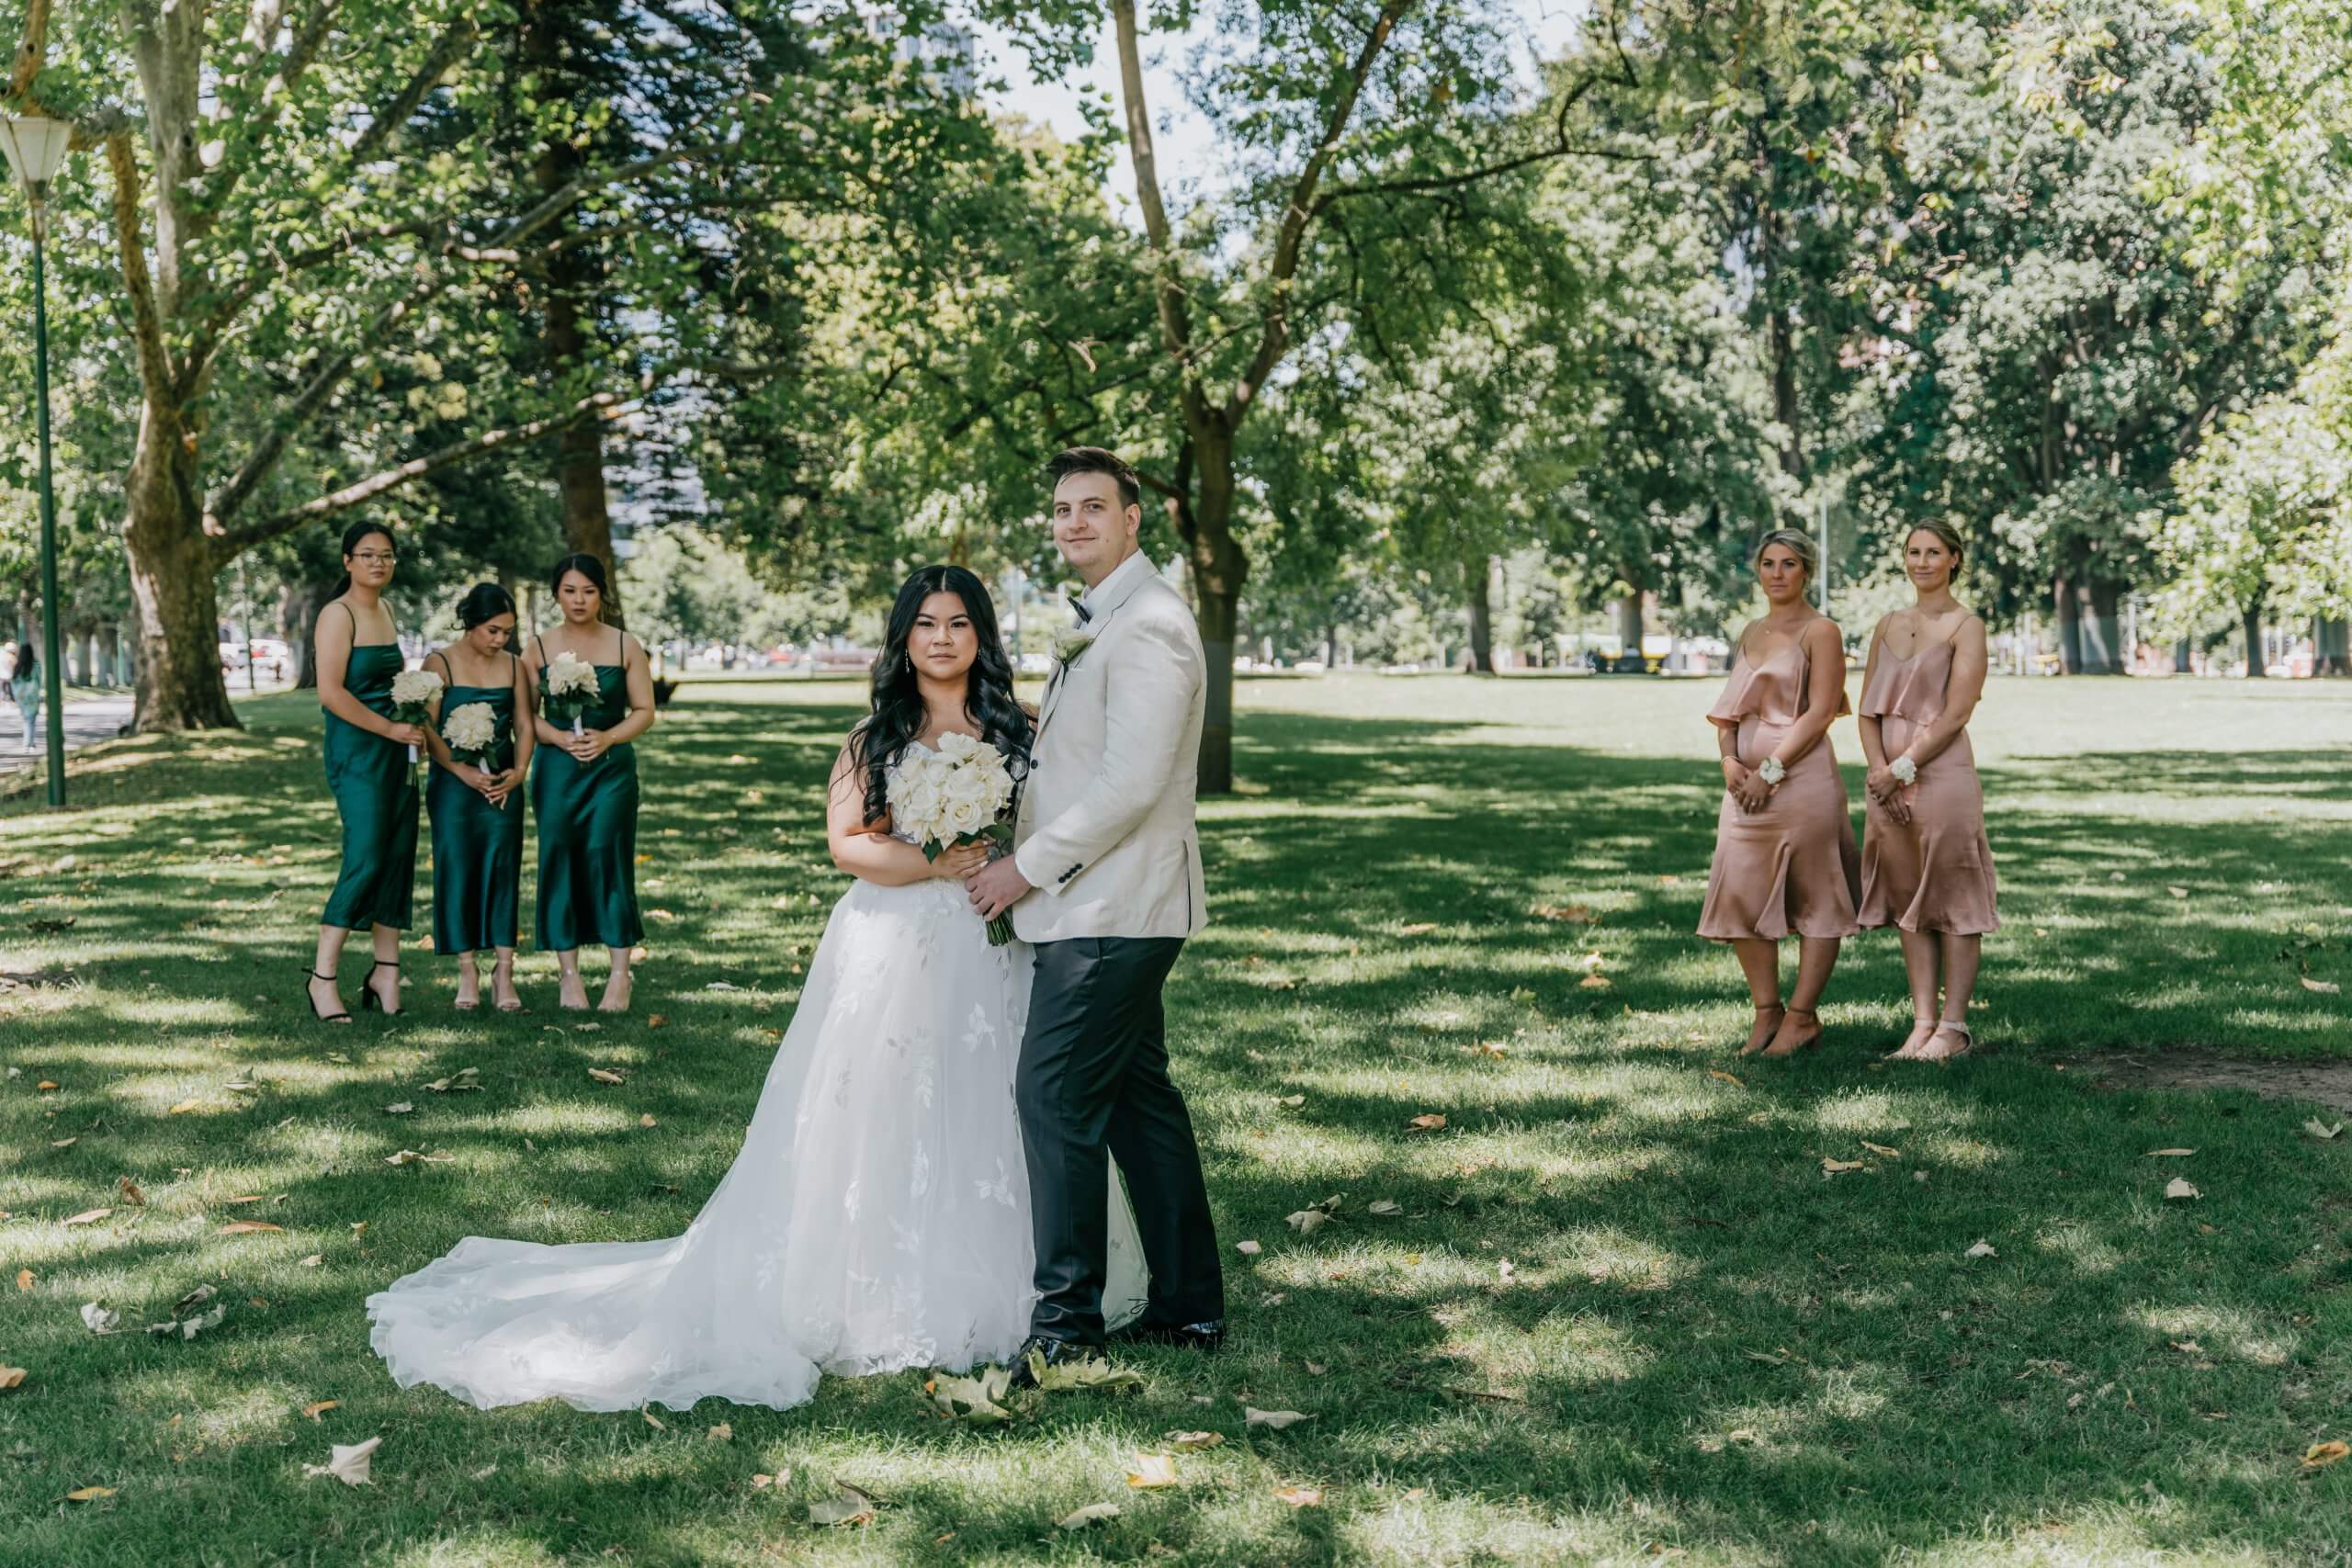 The bride and groom, surrounded by greenery, stands in front of the camera, while 5 bridesmaids wearing emerald green and rose-gold dresses stand in the background